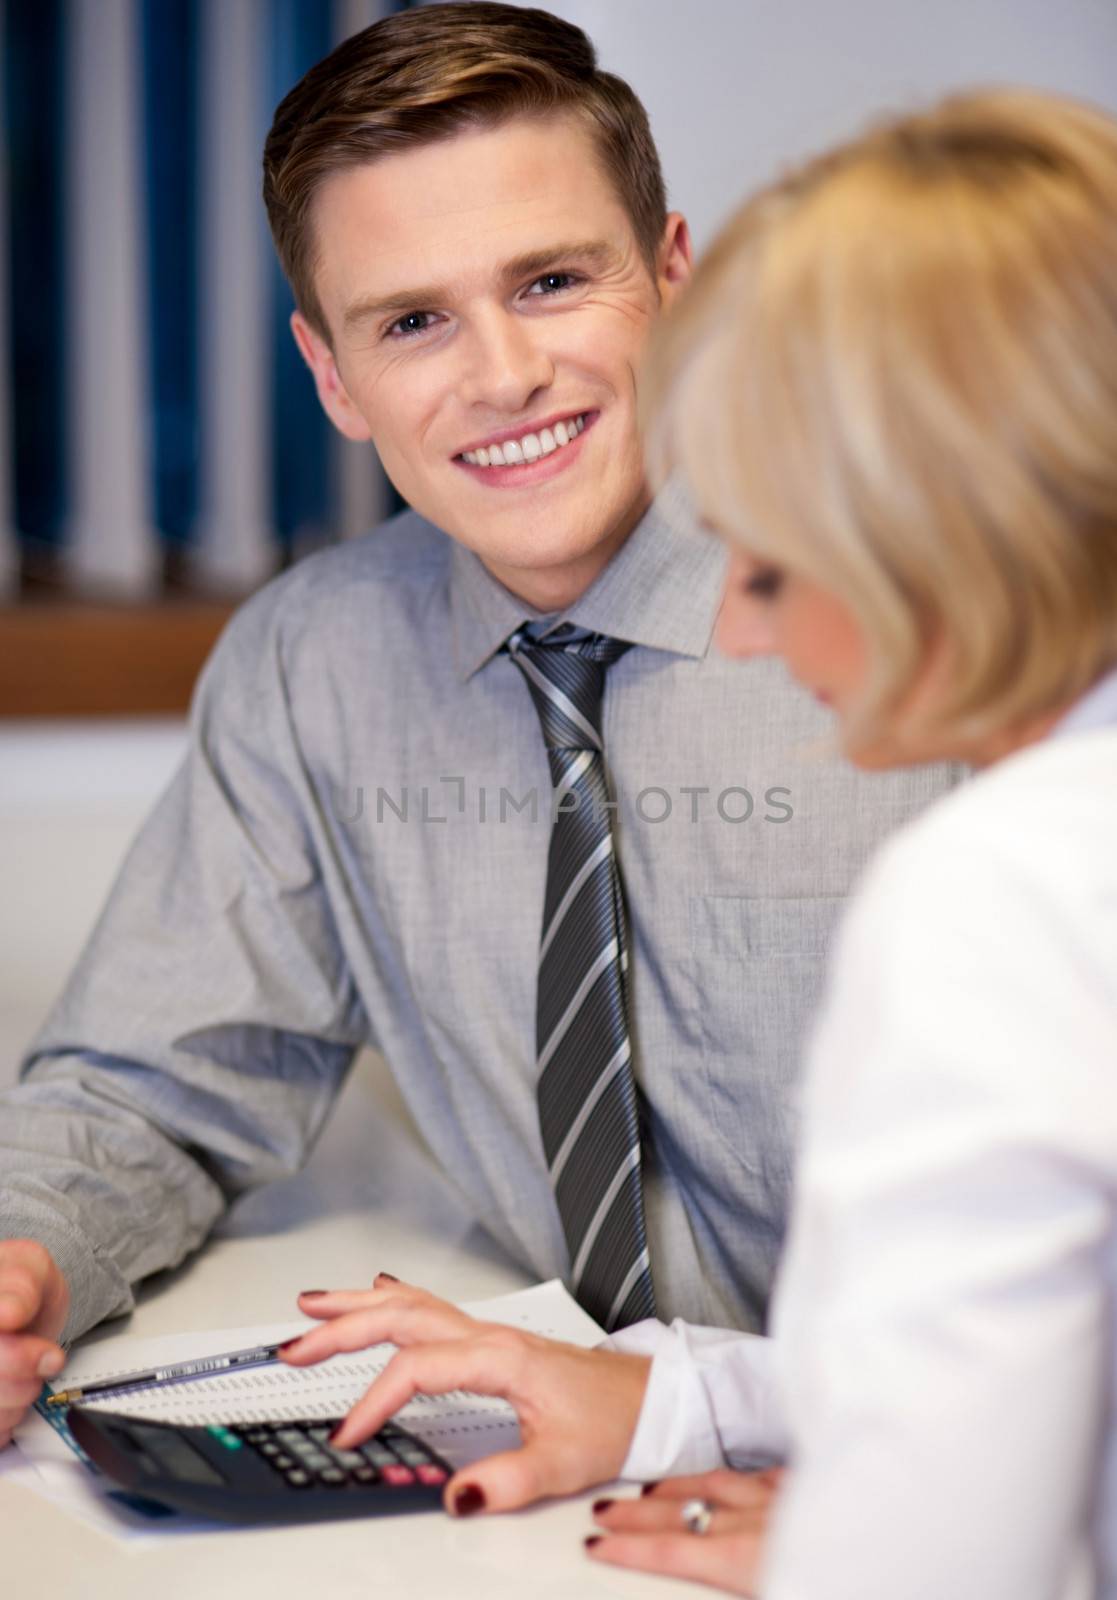 Manager working with his secretary by stockyimages